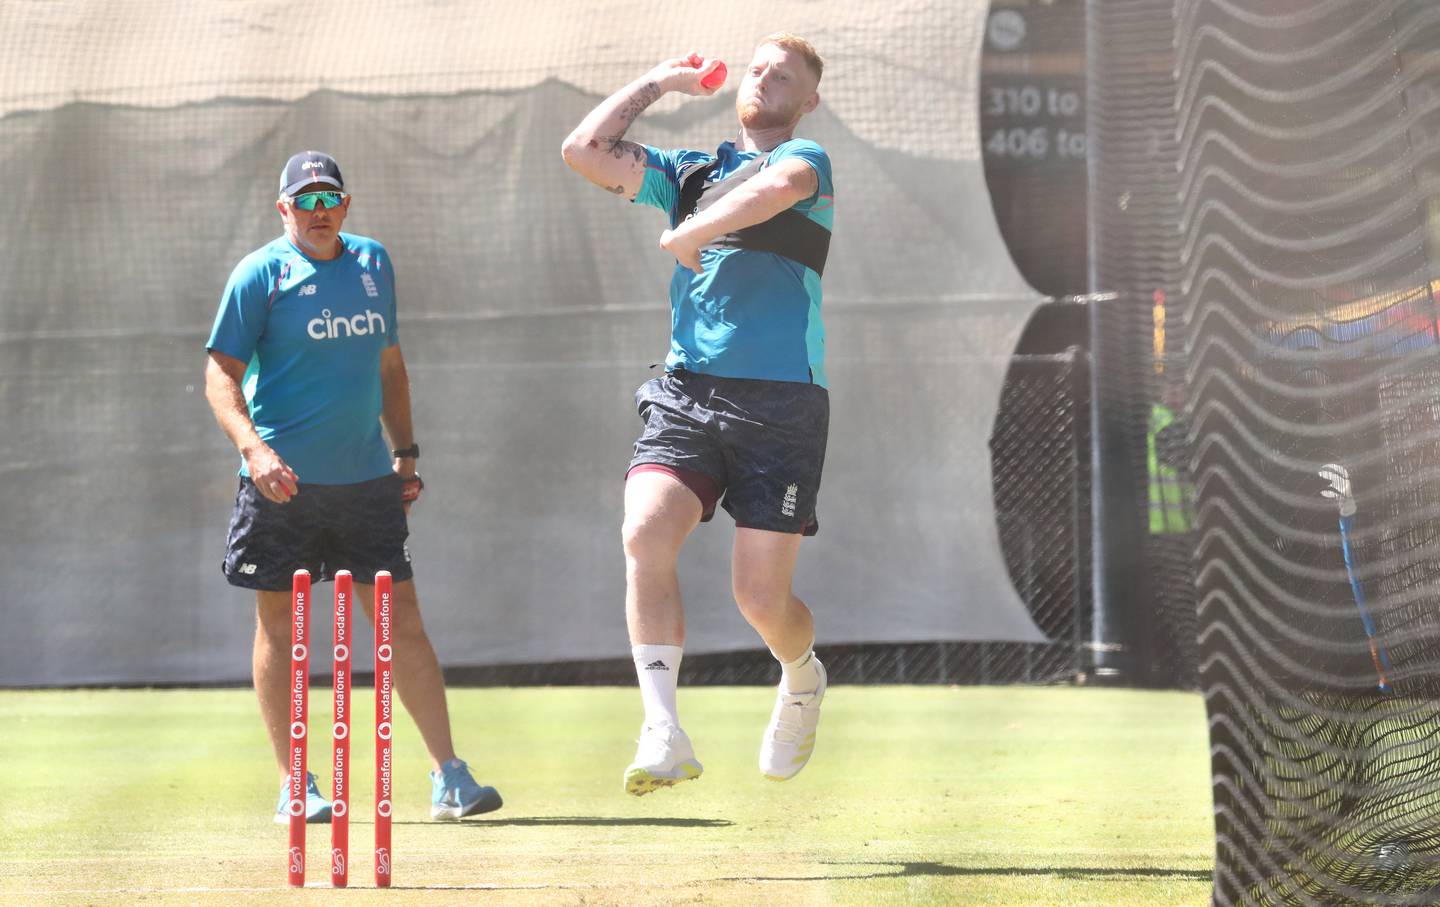 Ben Stokes during a nets session at the Adelaide Oval. PA